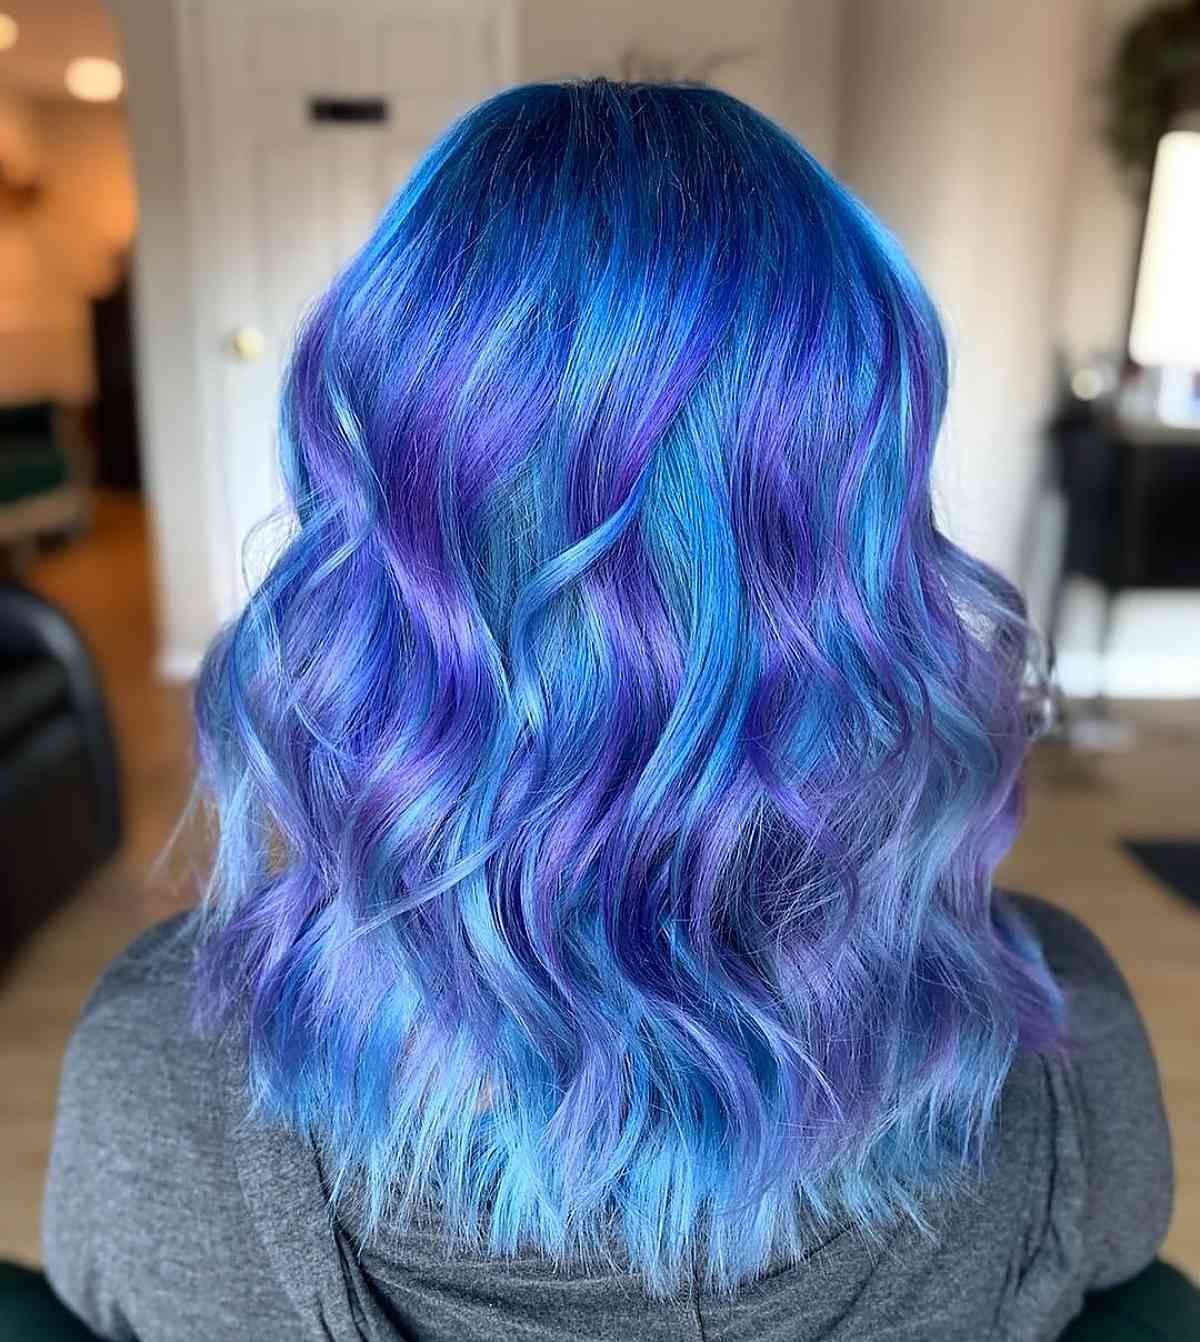 26 Incredible Examples Of Blue And Purple Hair In 2022 Intended For Edgy Lavender Short Hairstyles With Aqua Tones (View 19 of 25)